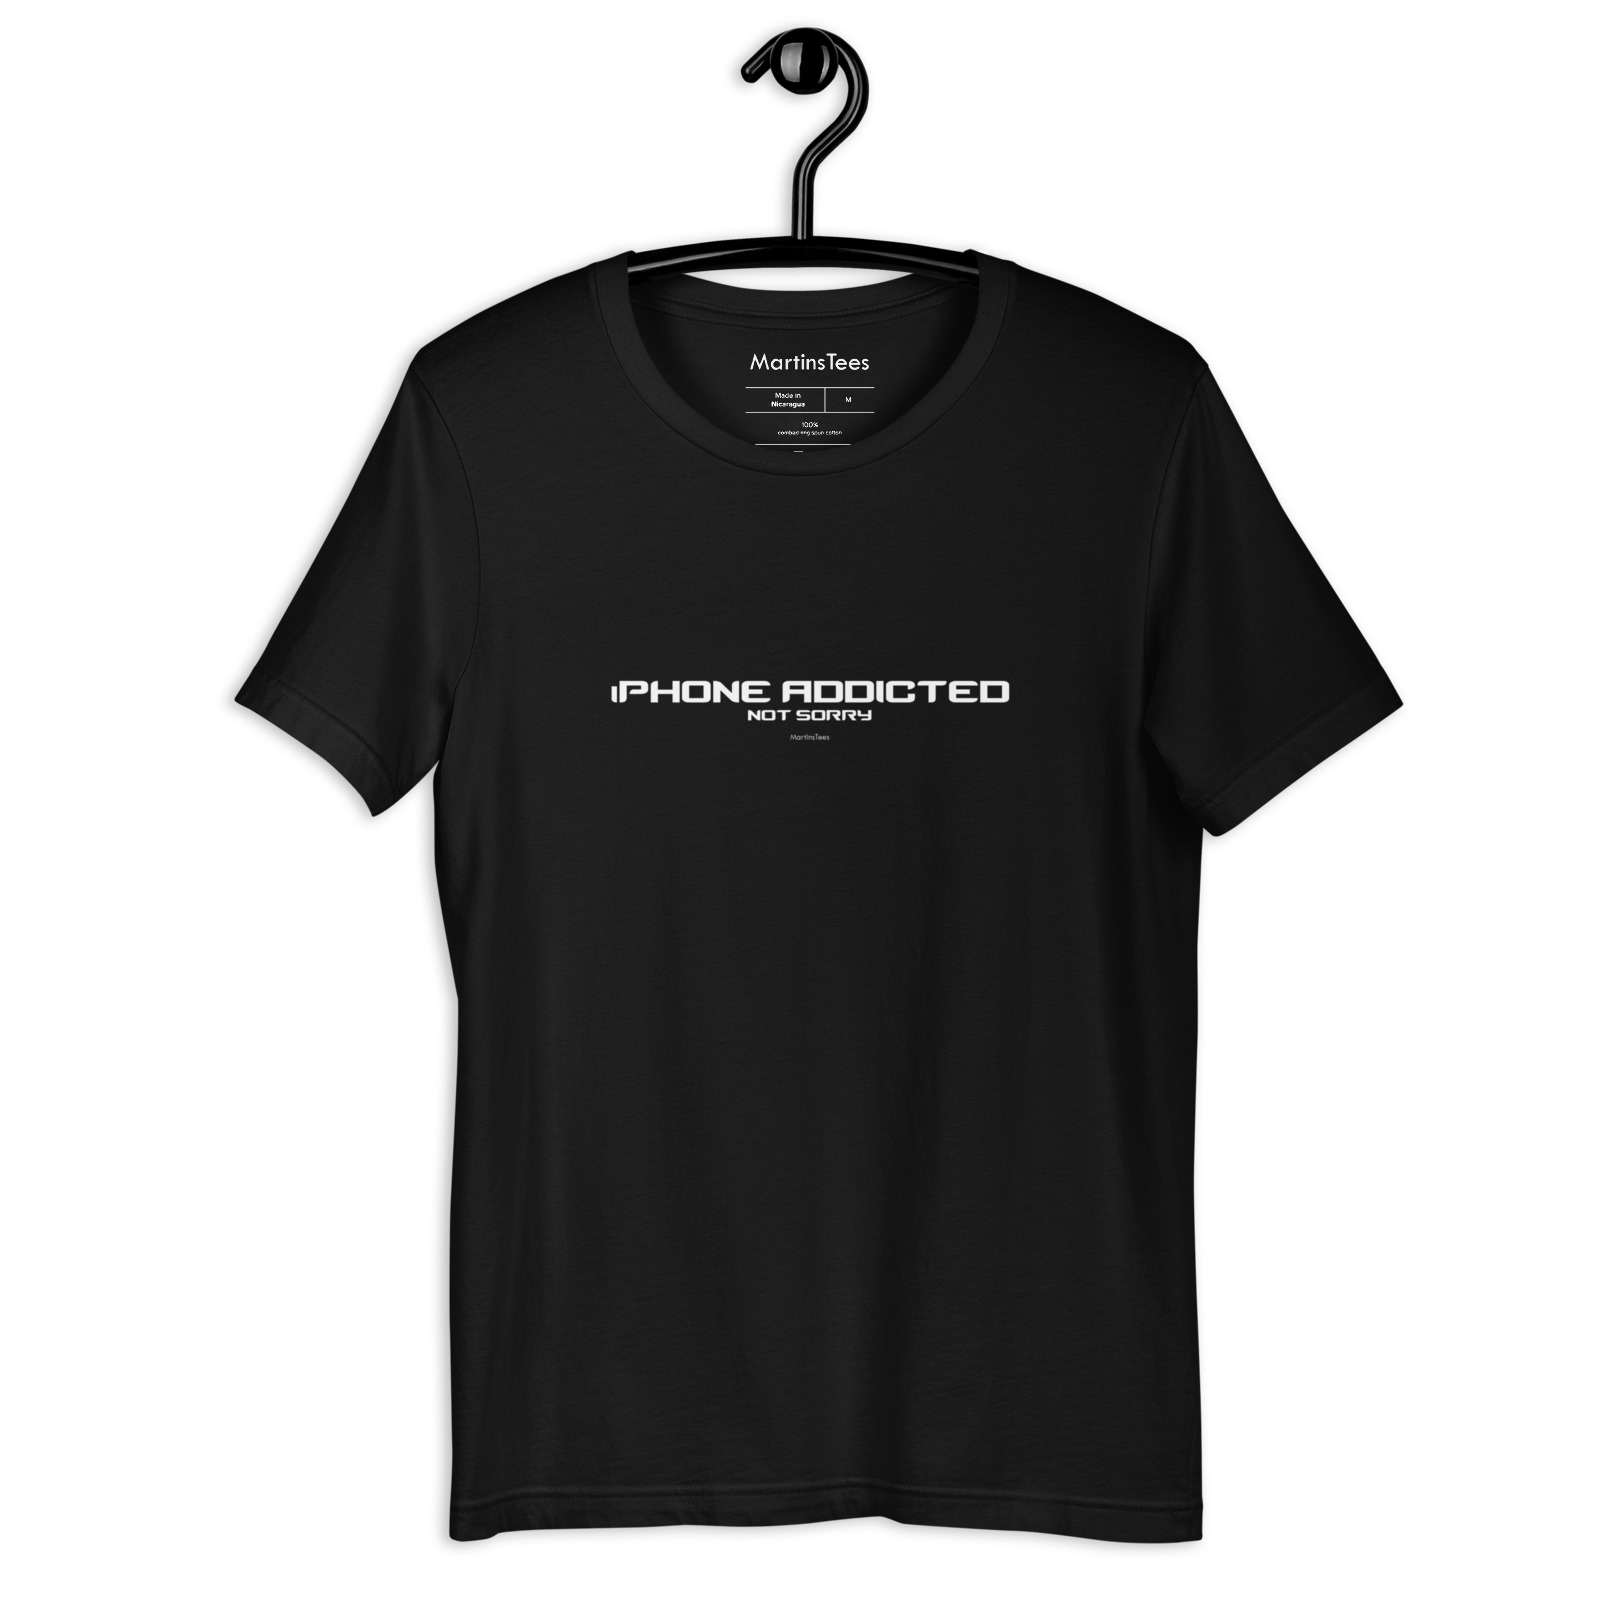 T-shirt: iPHONE ADDICTED - NOT SORRY